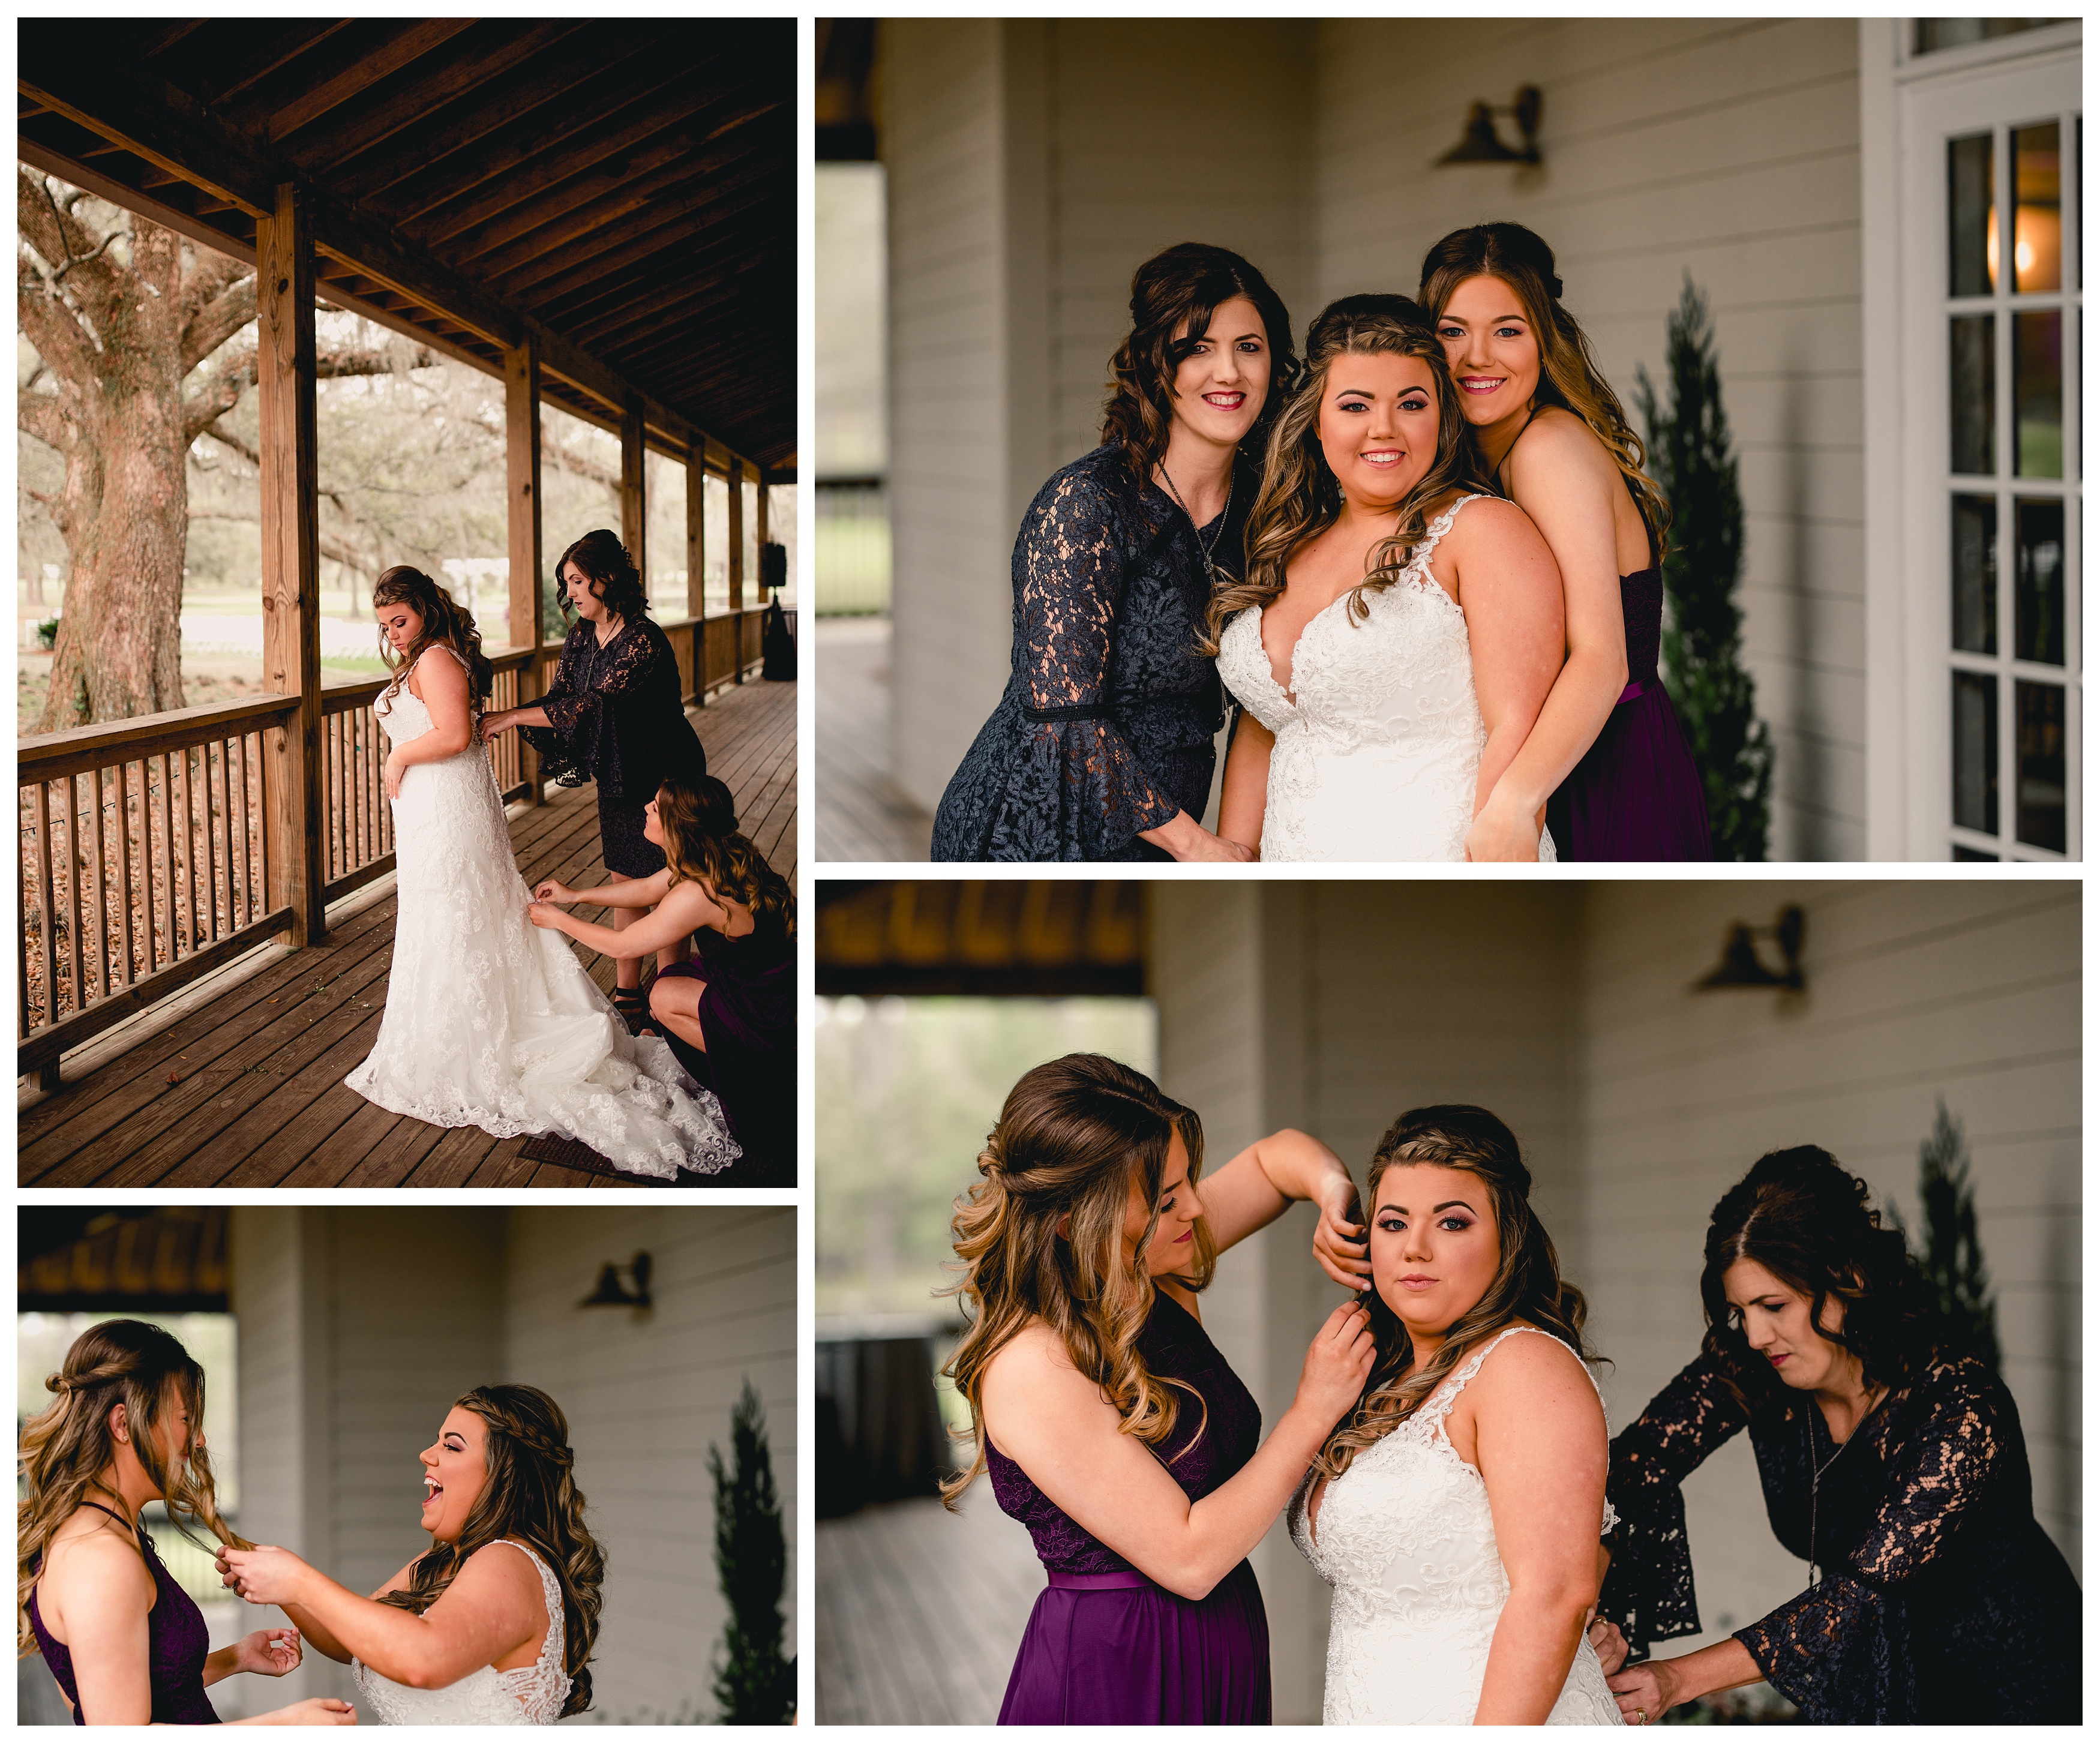 Mom and sister putting bride in her dress at Bradley's Pond in Tallahassee, FL. Shelly Williams Photography